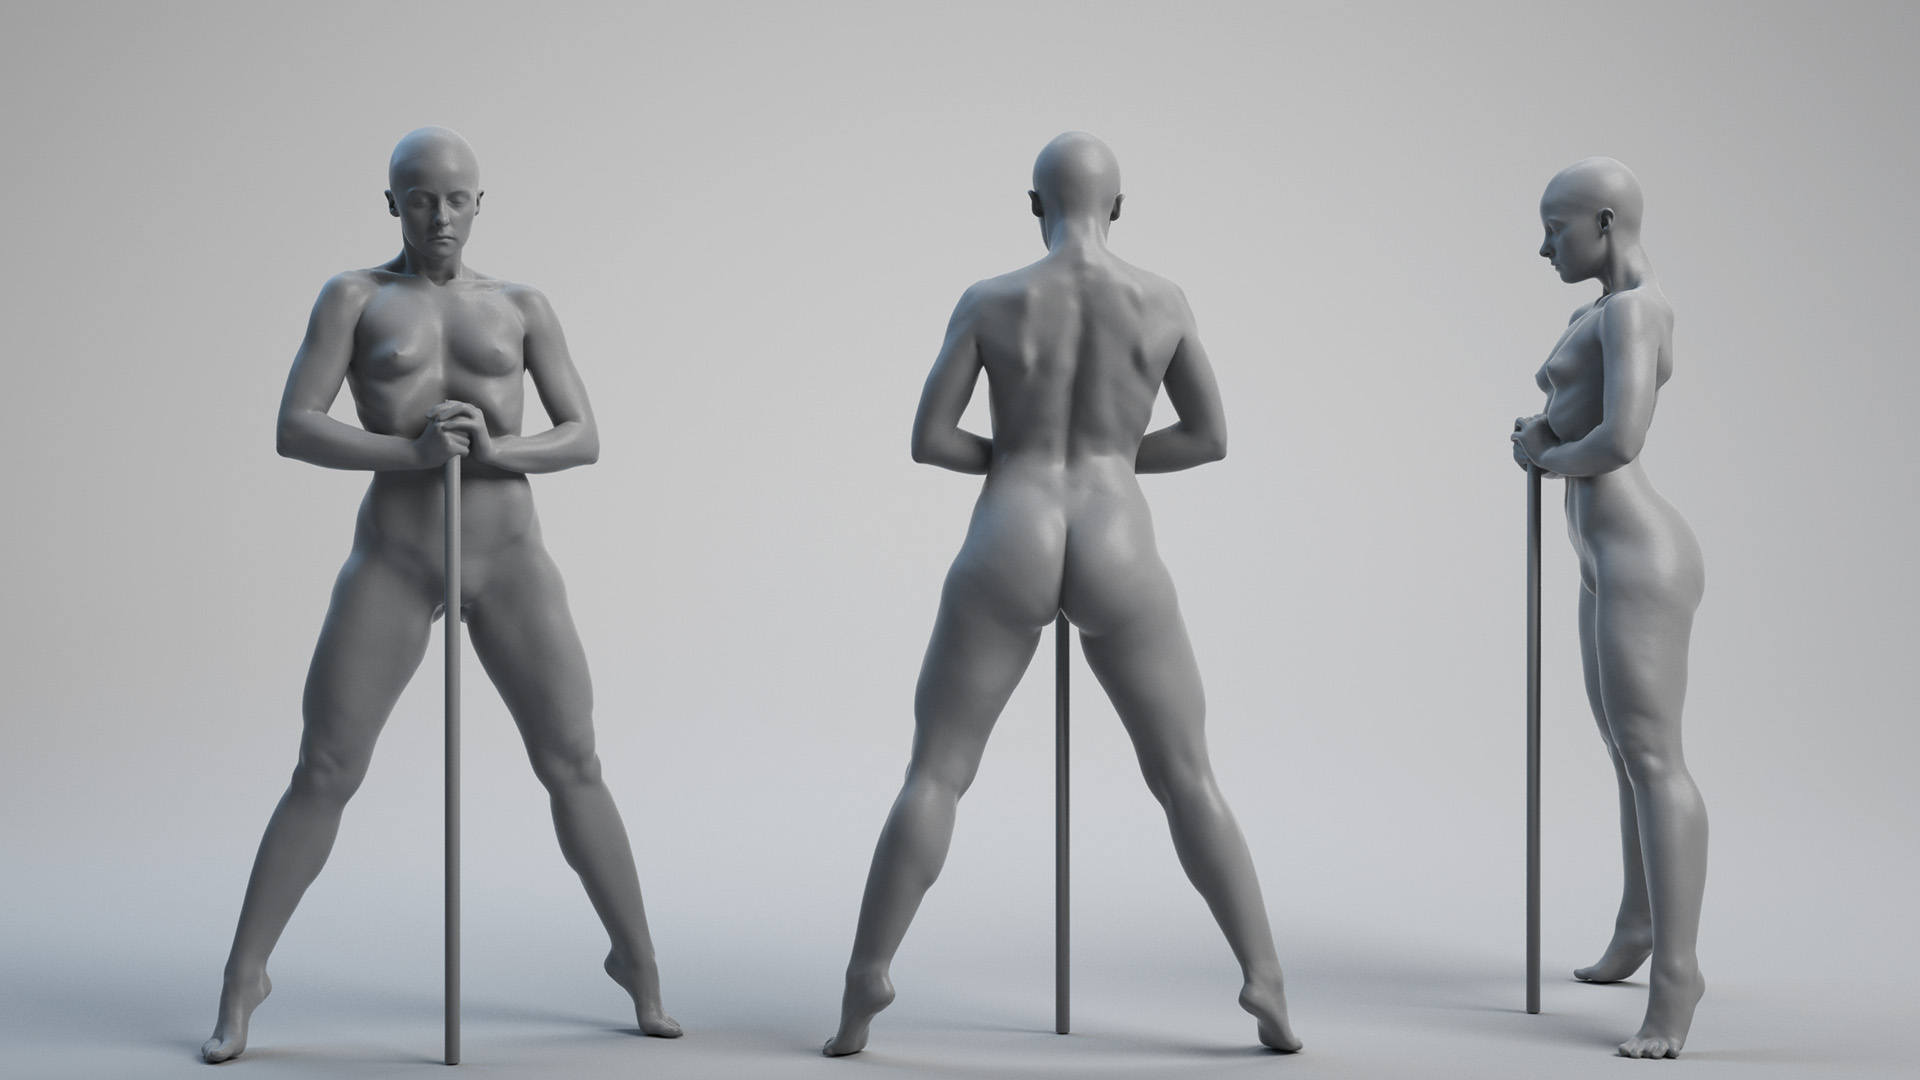 Female posture posing with sword prop in three dimensional model